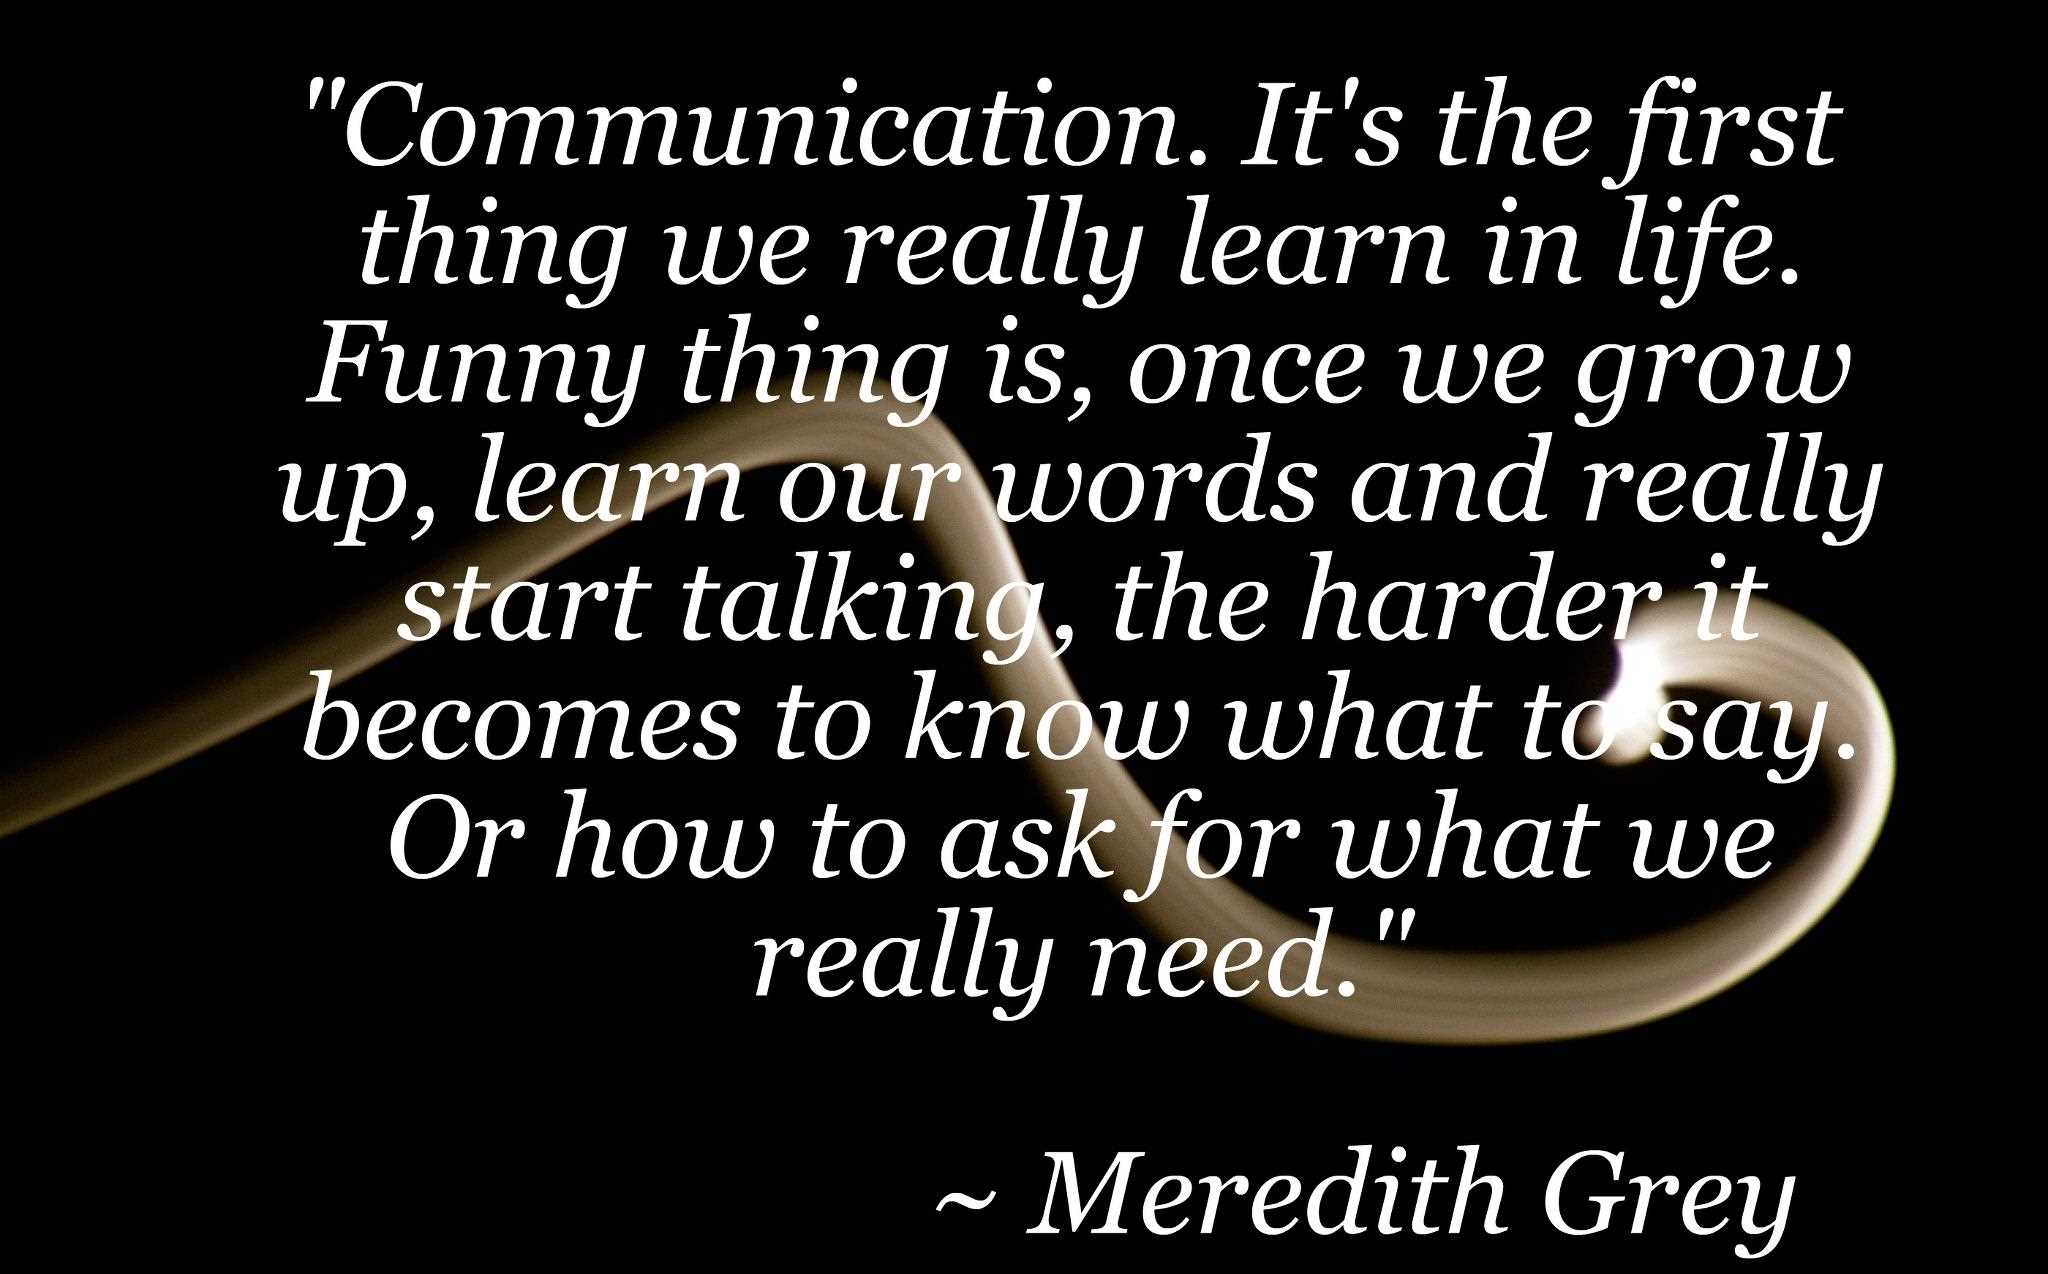 Communication, it's the first thing we really learn in life. Funny thing is once we grow up, learn our words and really start talking, the harder it gets to know what to say or how to ask what we... ... often but every now and then, some things simply speak for themselves. -Meredith Grey